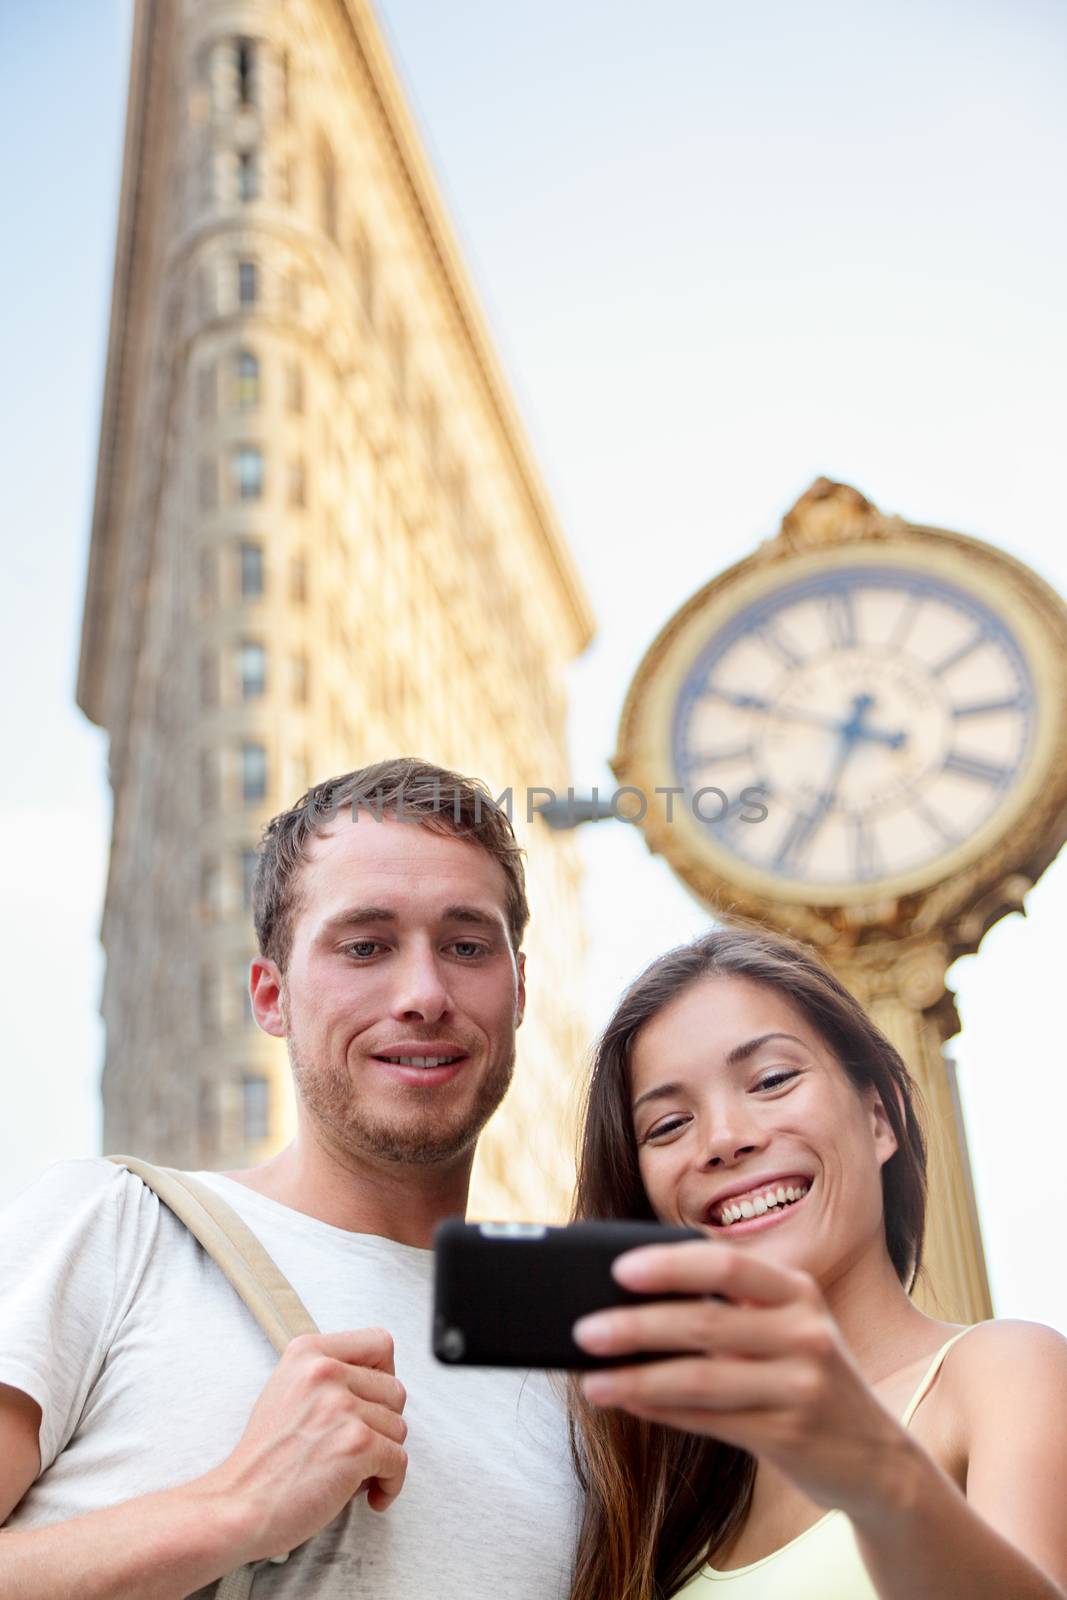 Travel couple taking selfie in New York City NYC, USA. Tourists holding smartphone to photograph self-portrait in front of famous Flatiron building downtown in summer.